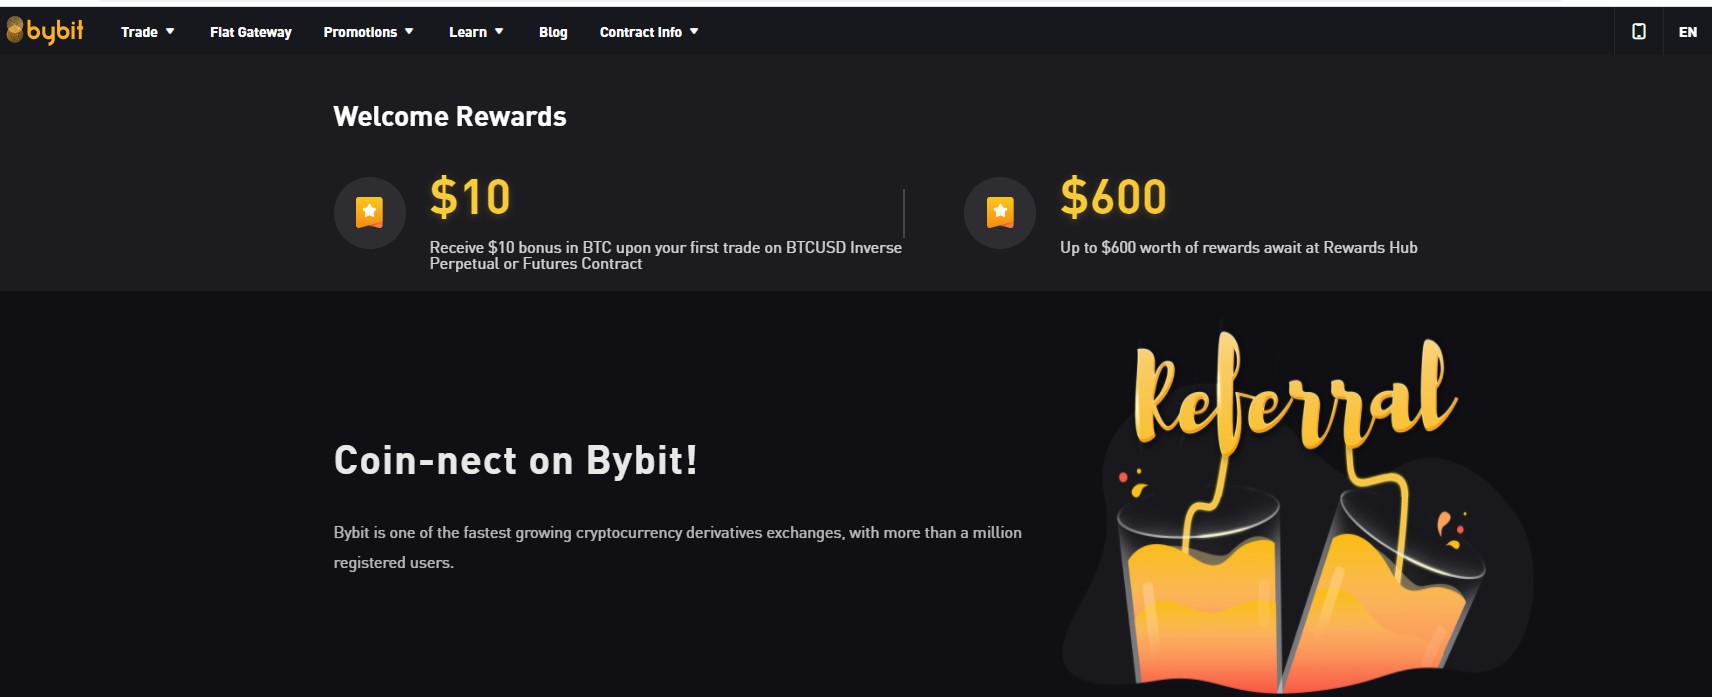 Bybit.com Review 2021 – Pros and Cons of Trading on Bybit